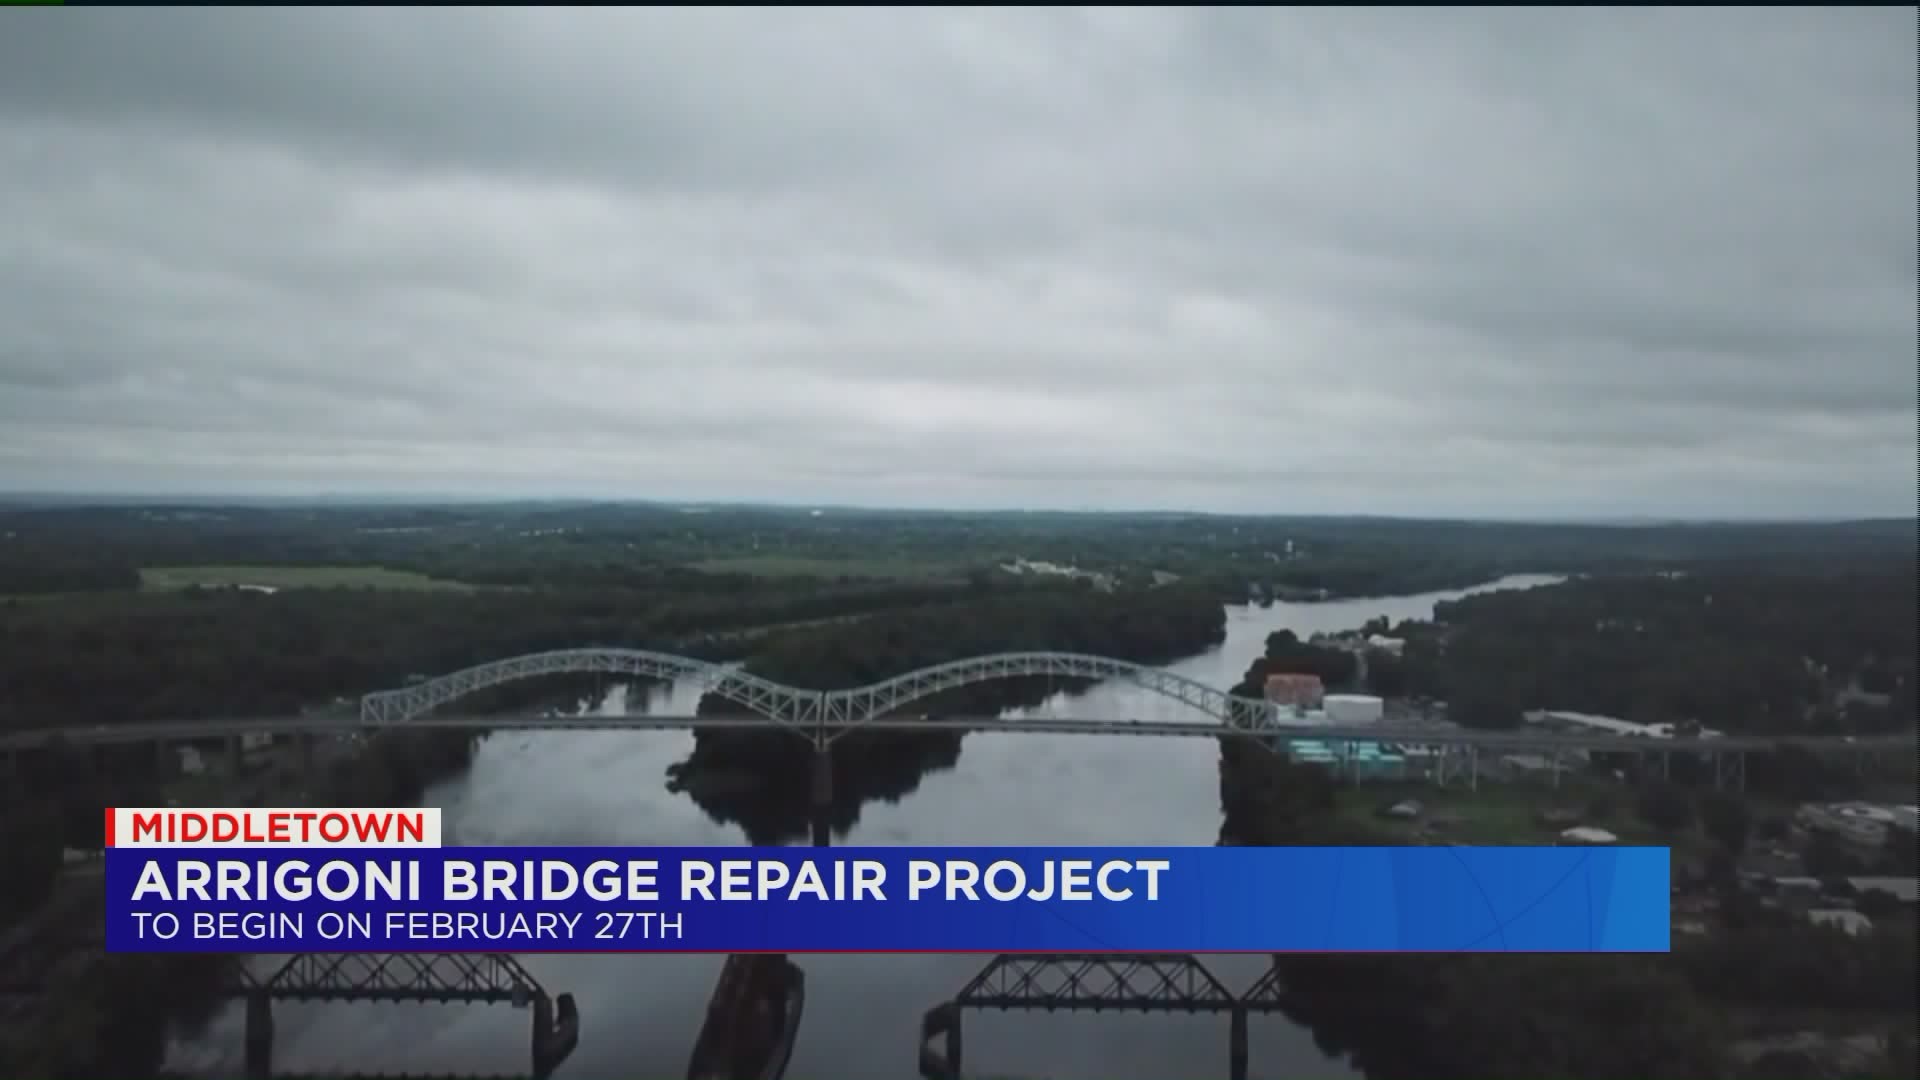 The project is set to begin February 27. Repairs are expected to take two years.